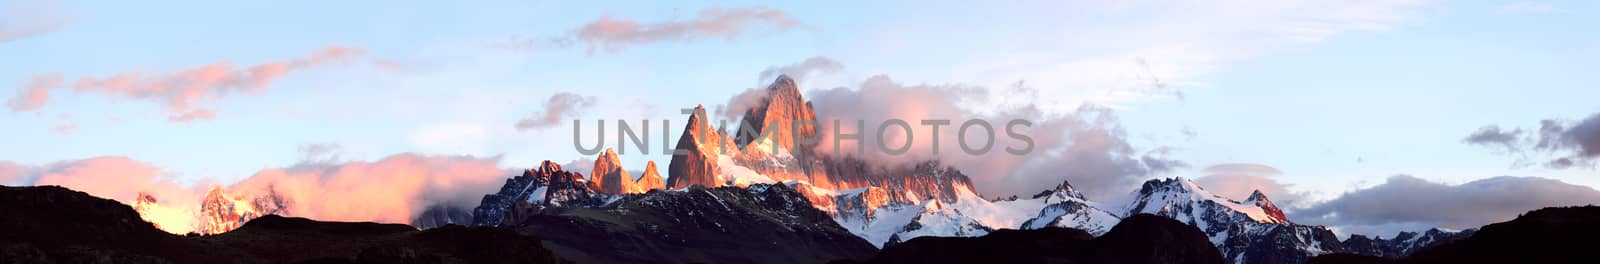 Andes in the fire. Giant panorama of mountain range Fitz Roy, Gl by xura